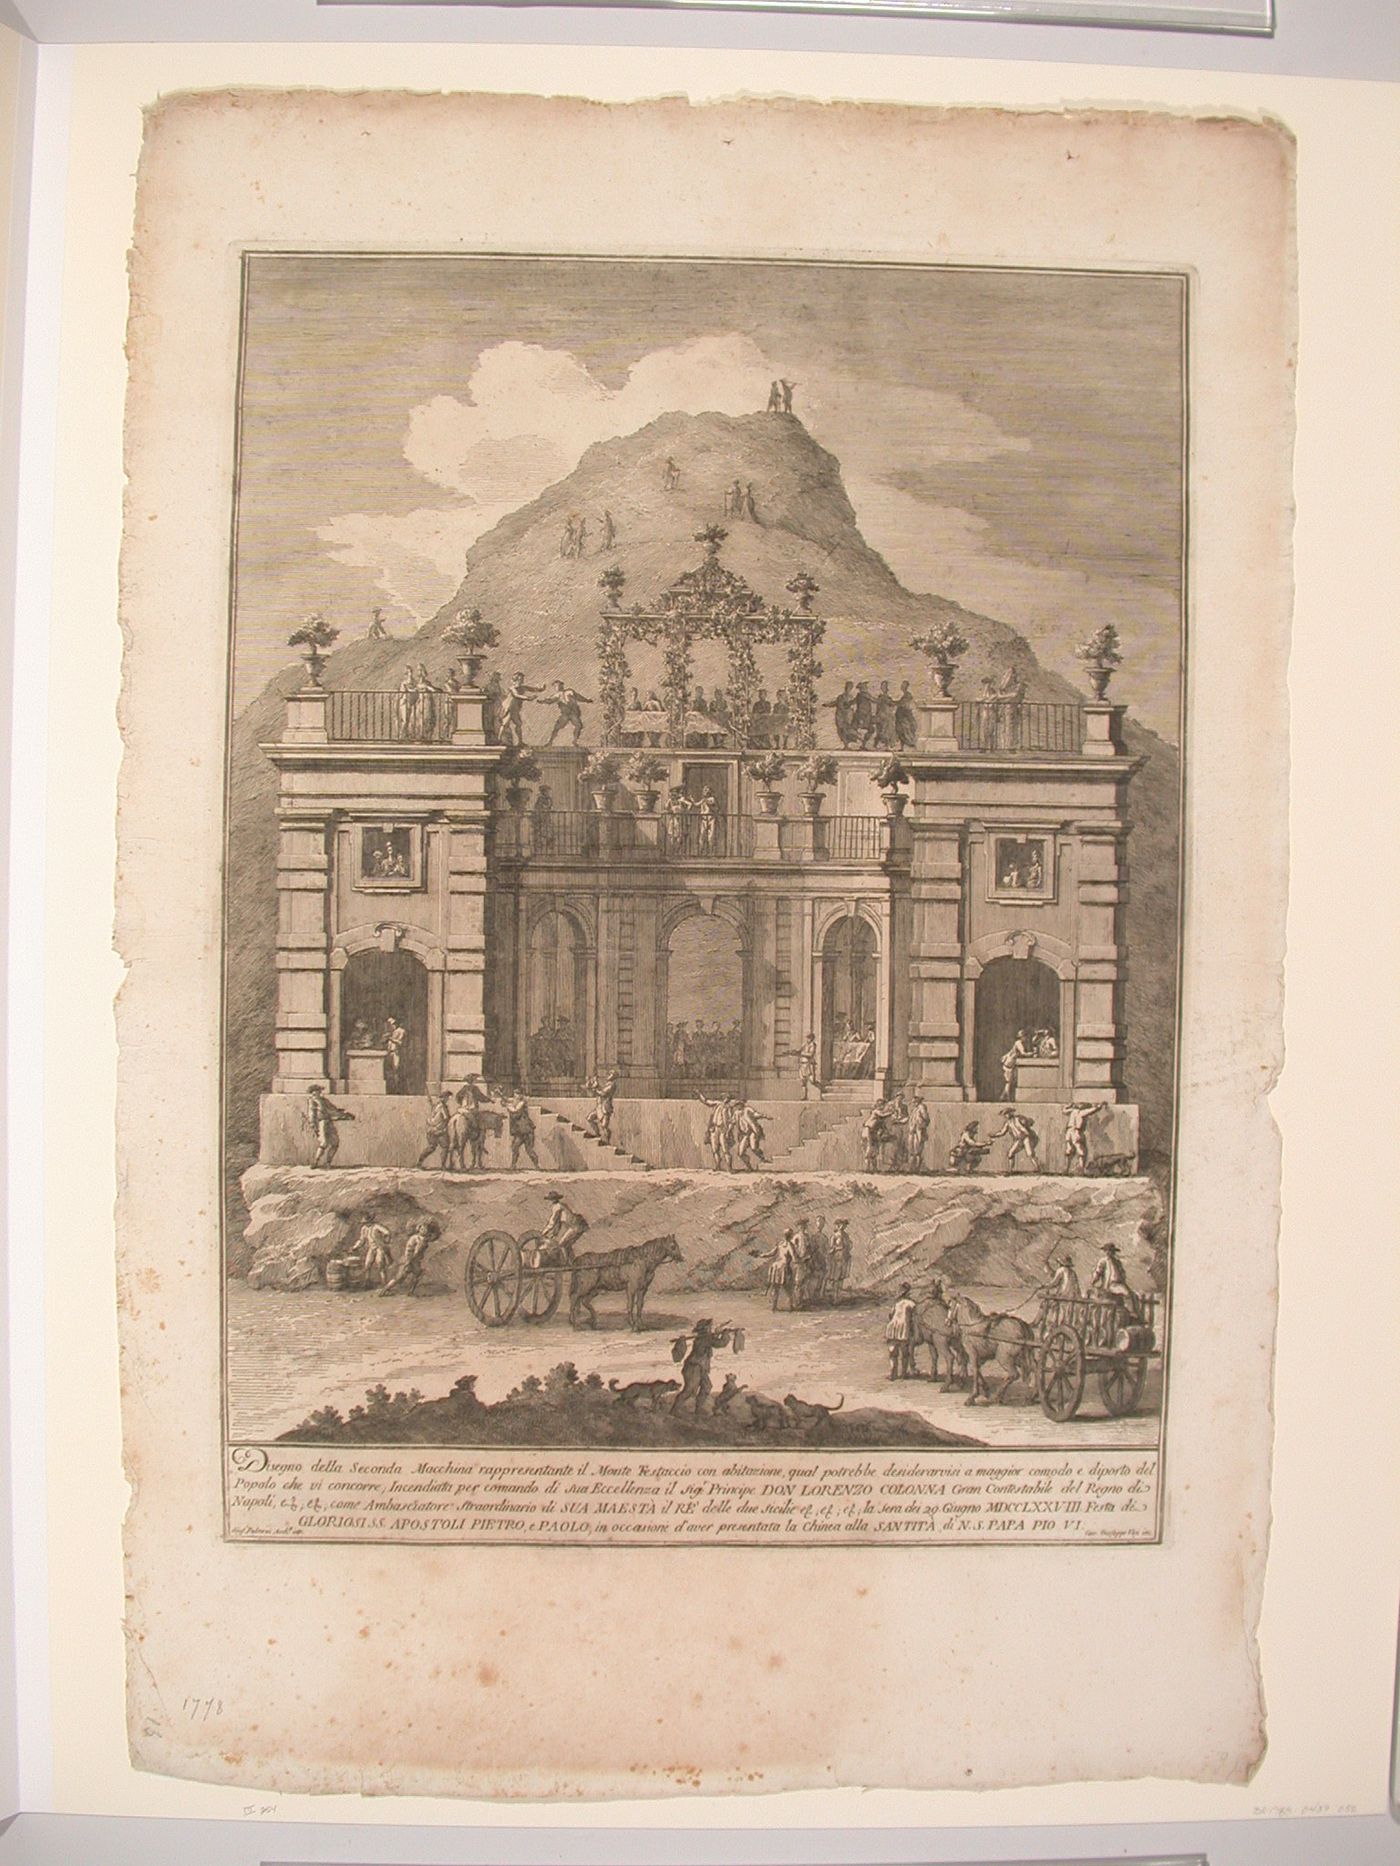 Etching of Palazzi's design for the "seconda macchina" of 1778